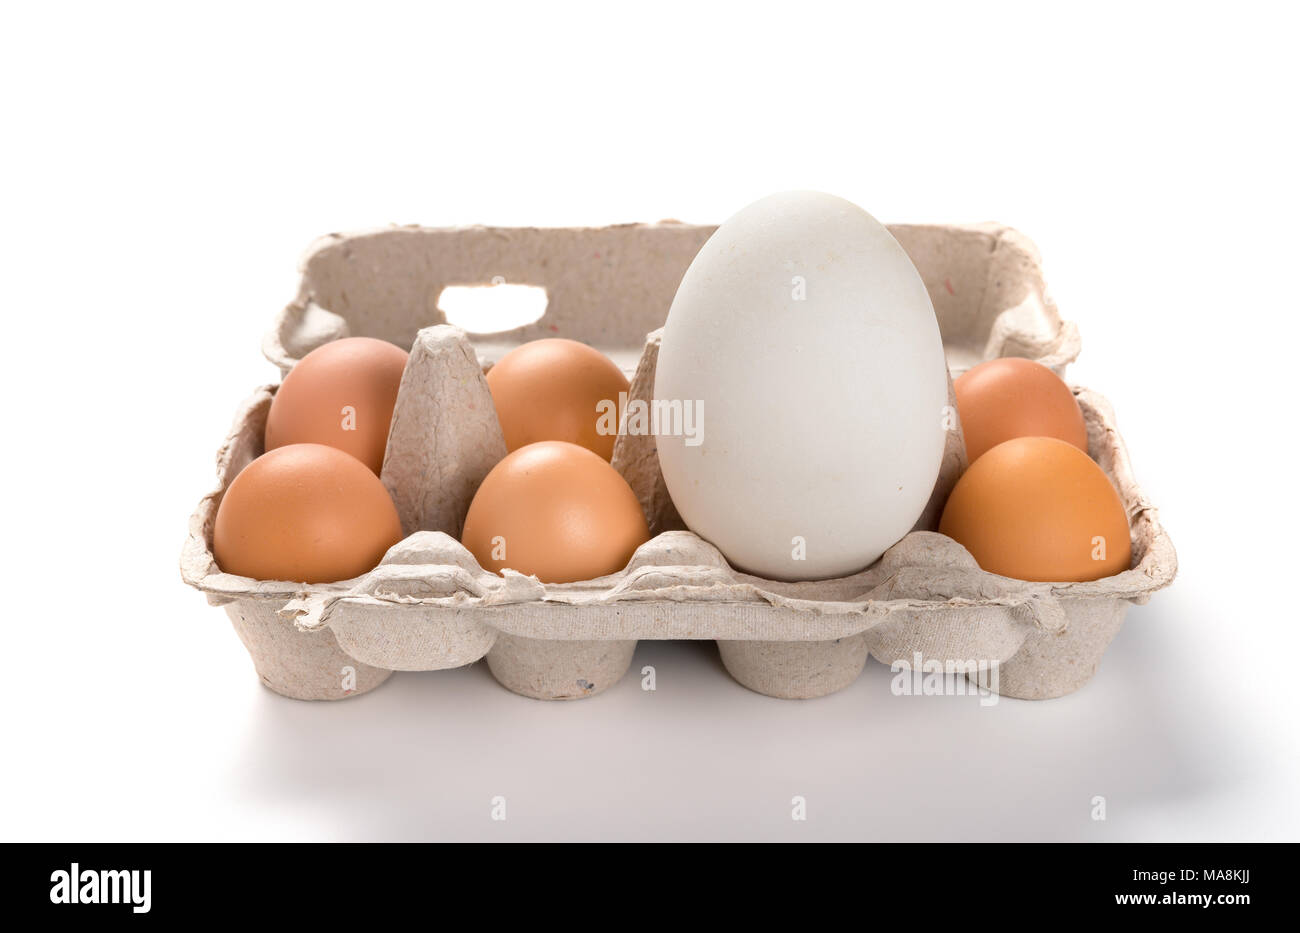 giant size goose egg between small chicken eggs in a package concept of size comparison Stock Photo